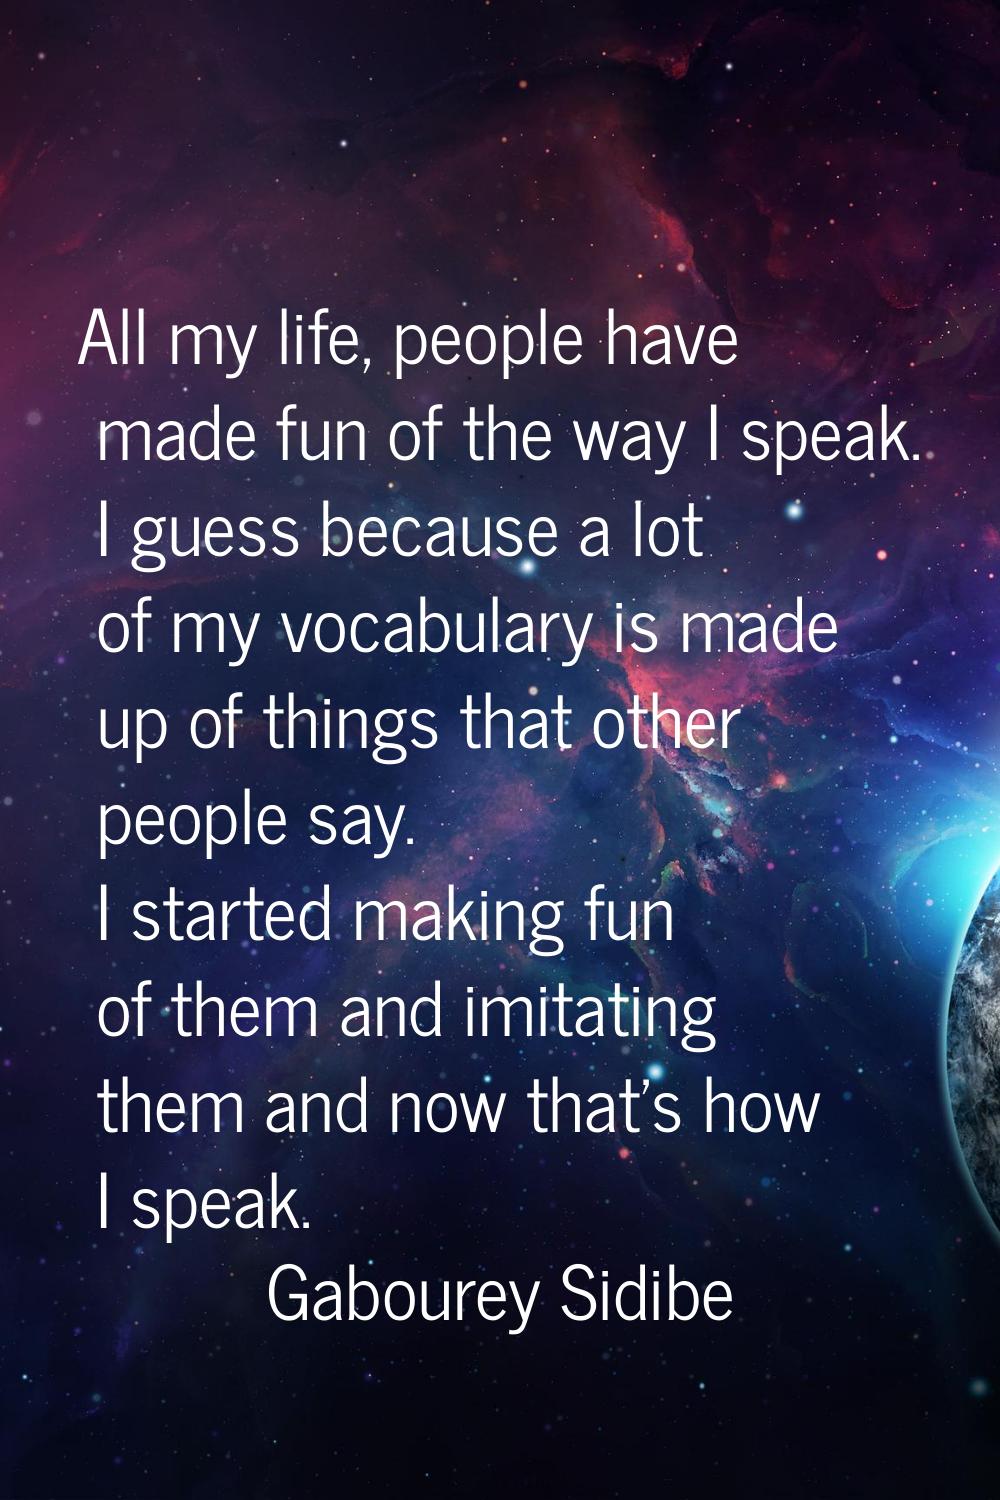 All my life, people have made fun of the way I speak. I guess because a lot of my vocabulary is mad